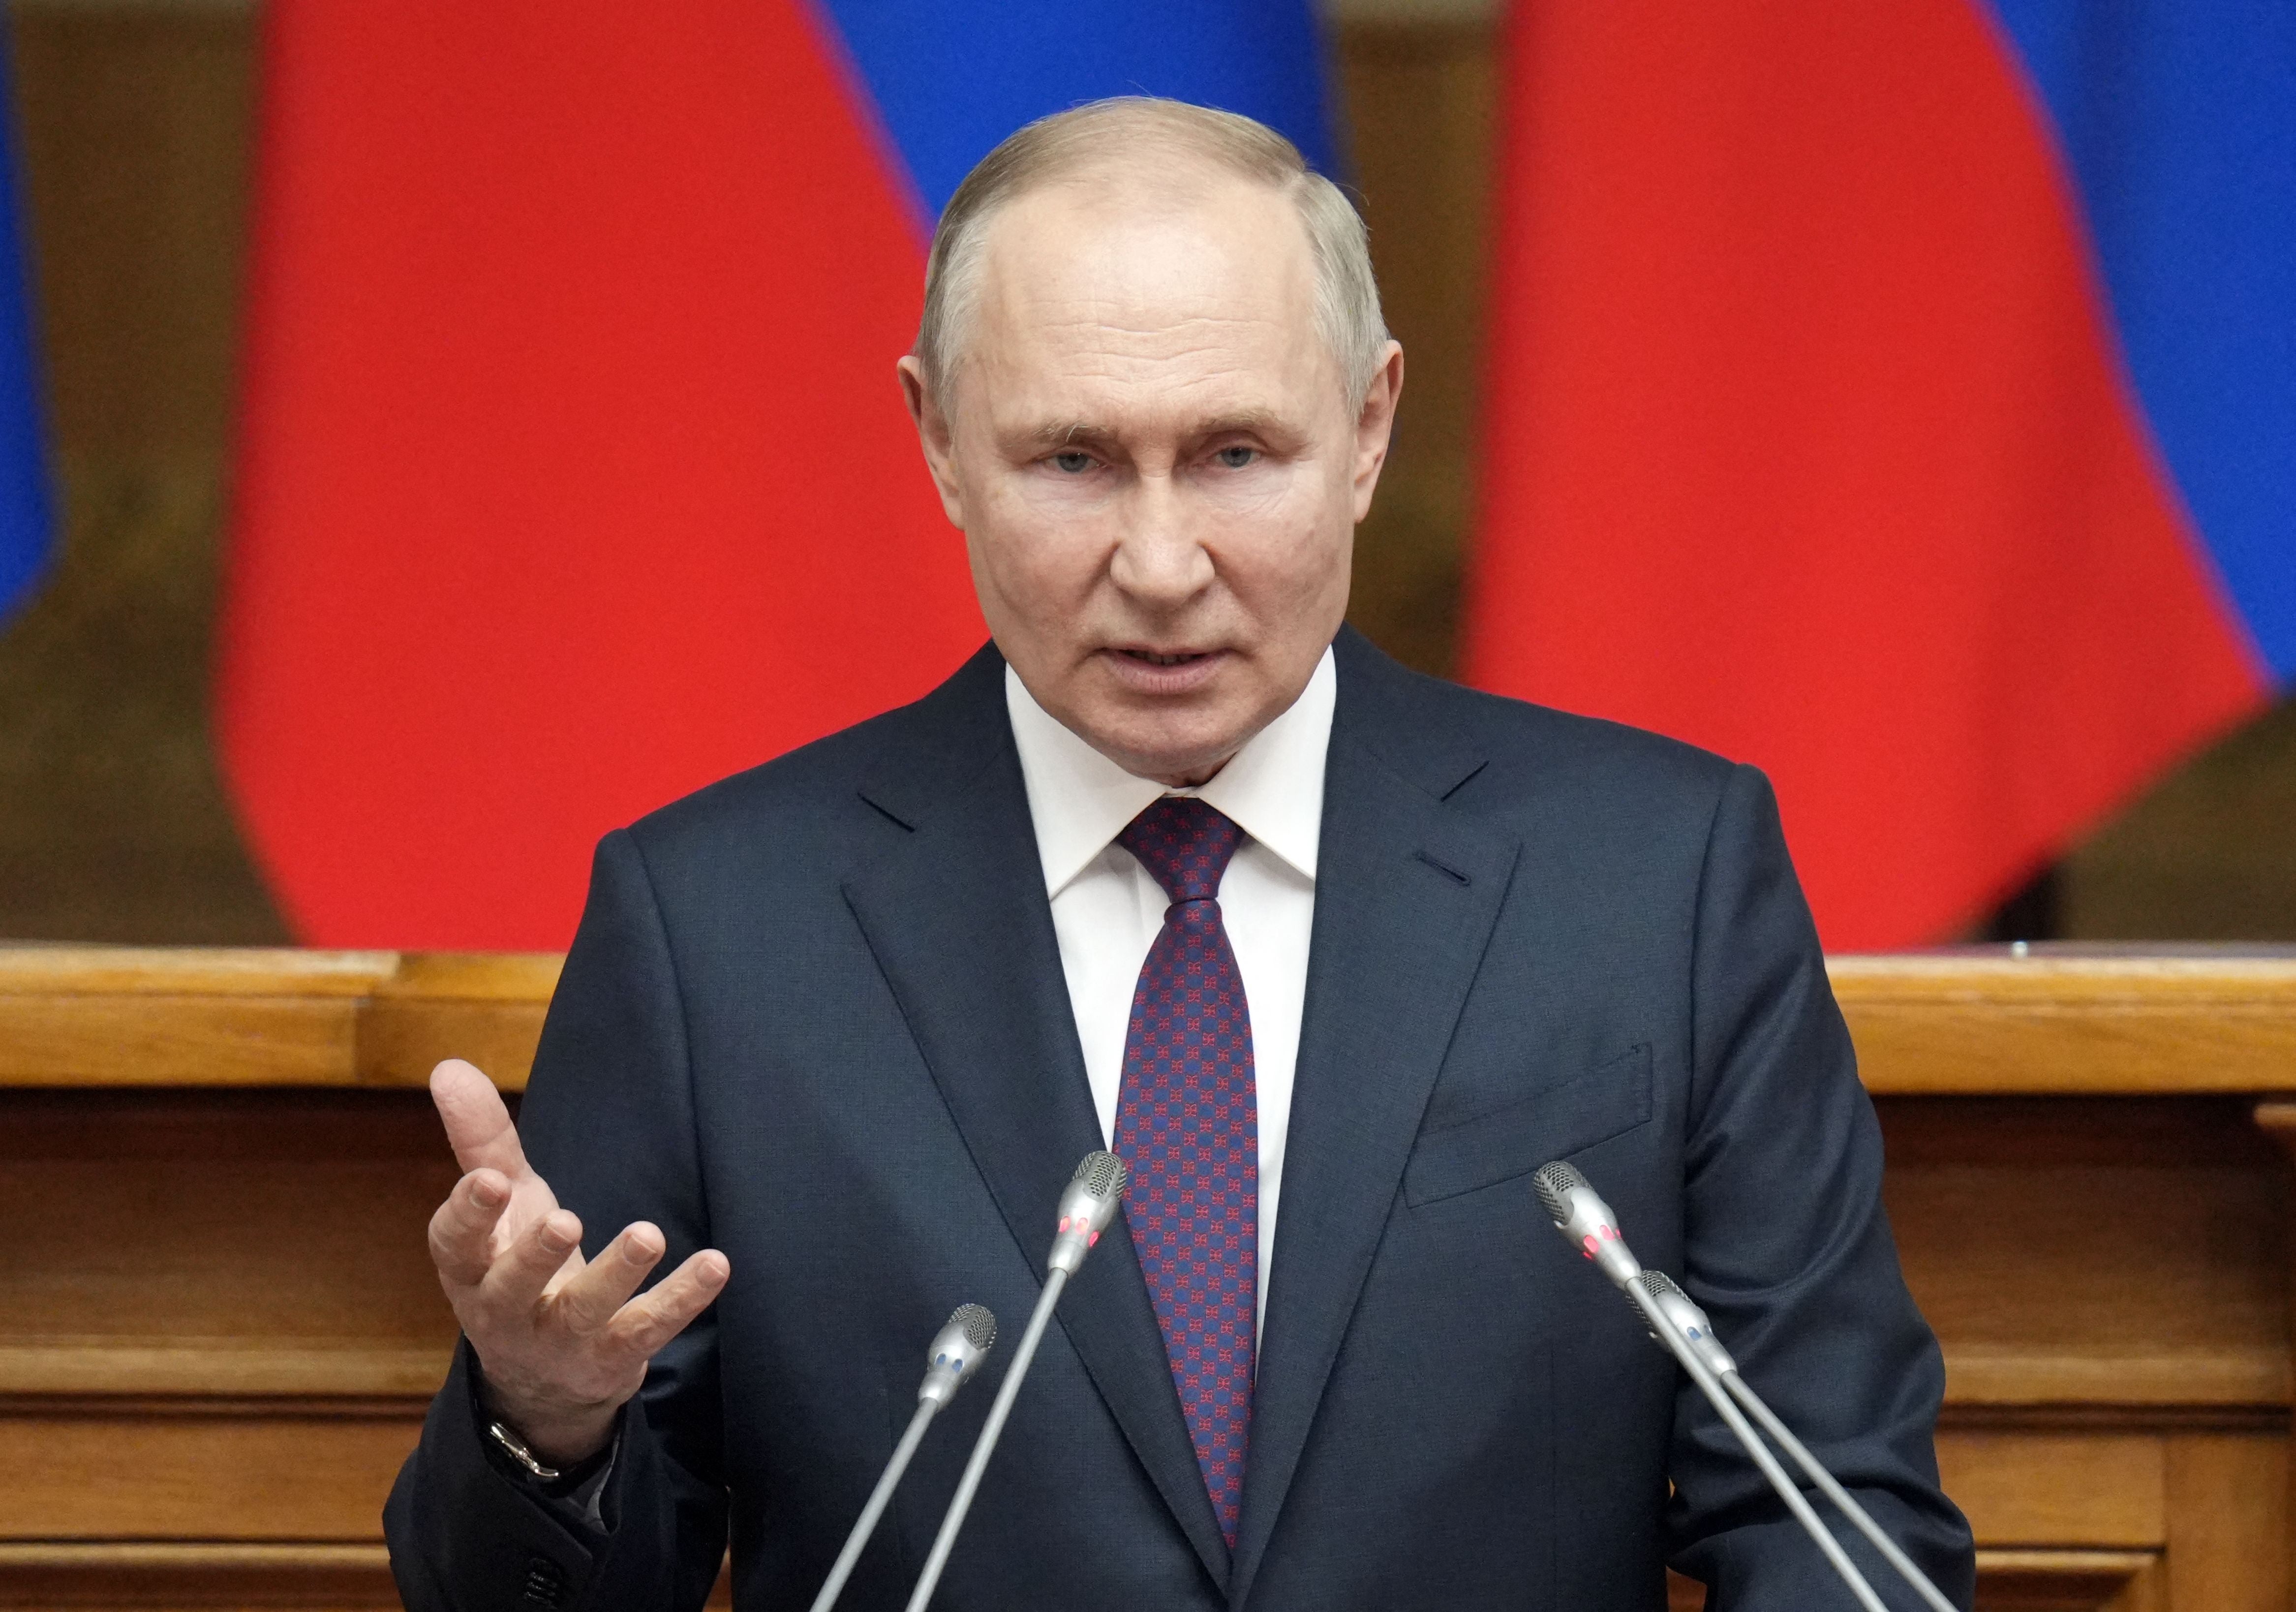 President Putin said the West is trying to break Russia up into states